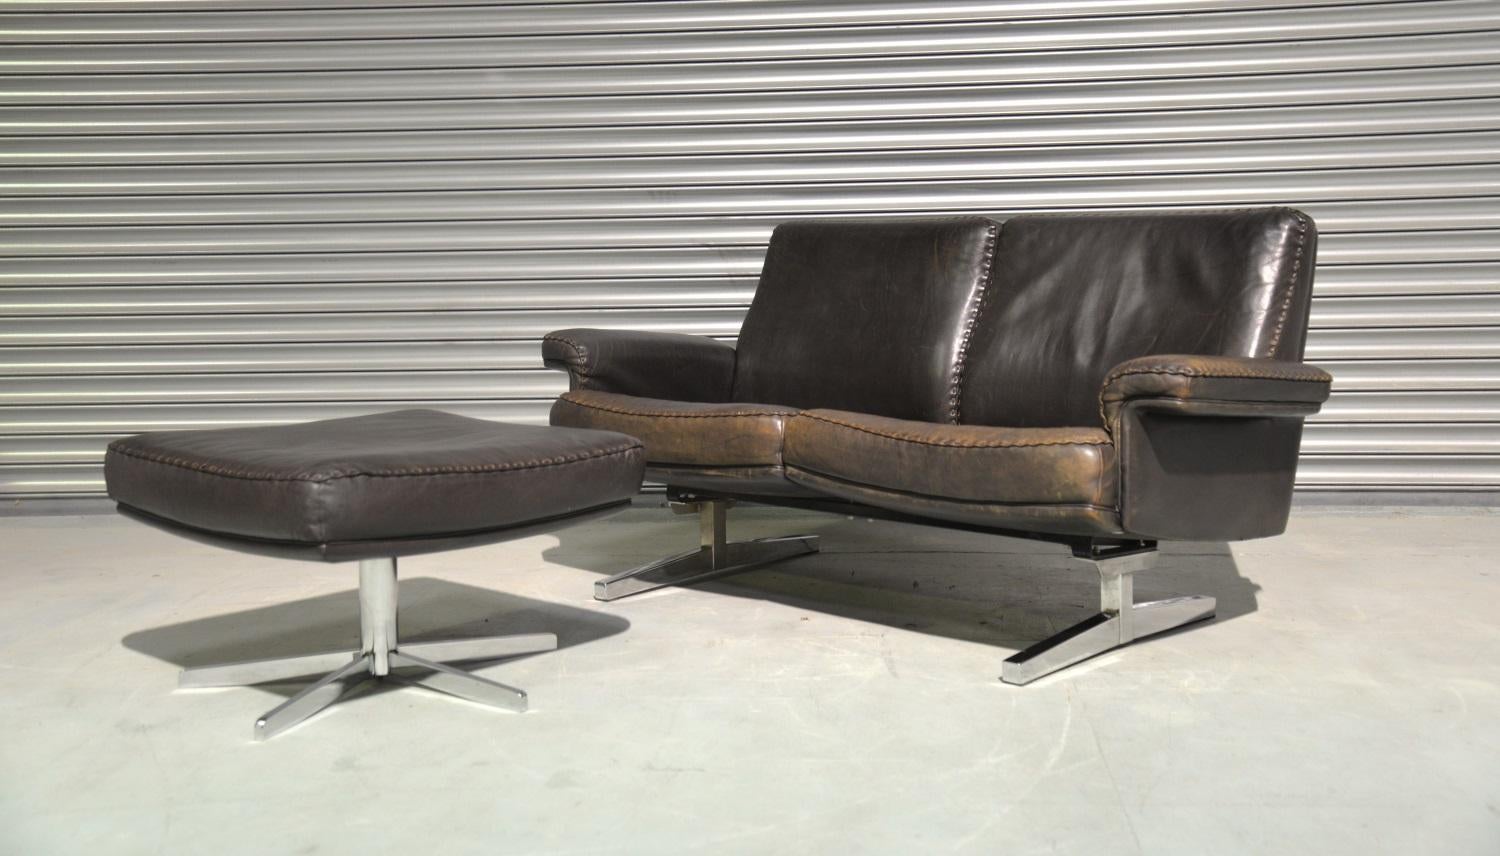 Discounted airfreight for our US and International customers (from 2 weeks door to door)

We are delighted to bring to you a rarely available and highly desirable De Sede DS 35 two-seat sofa or loveseat with ottoman in stunning dark brown aniline